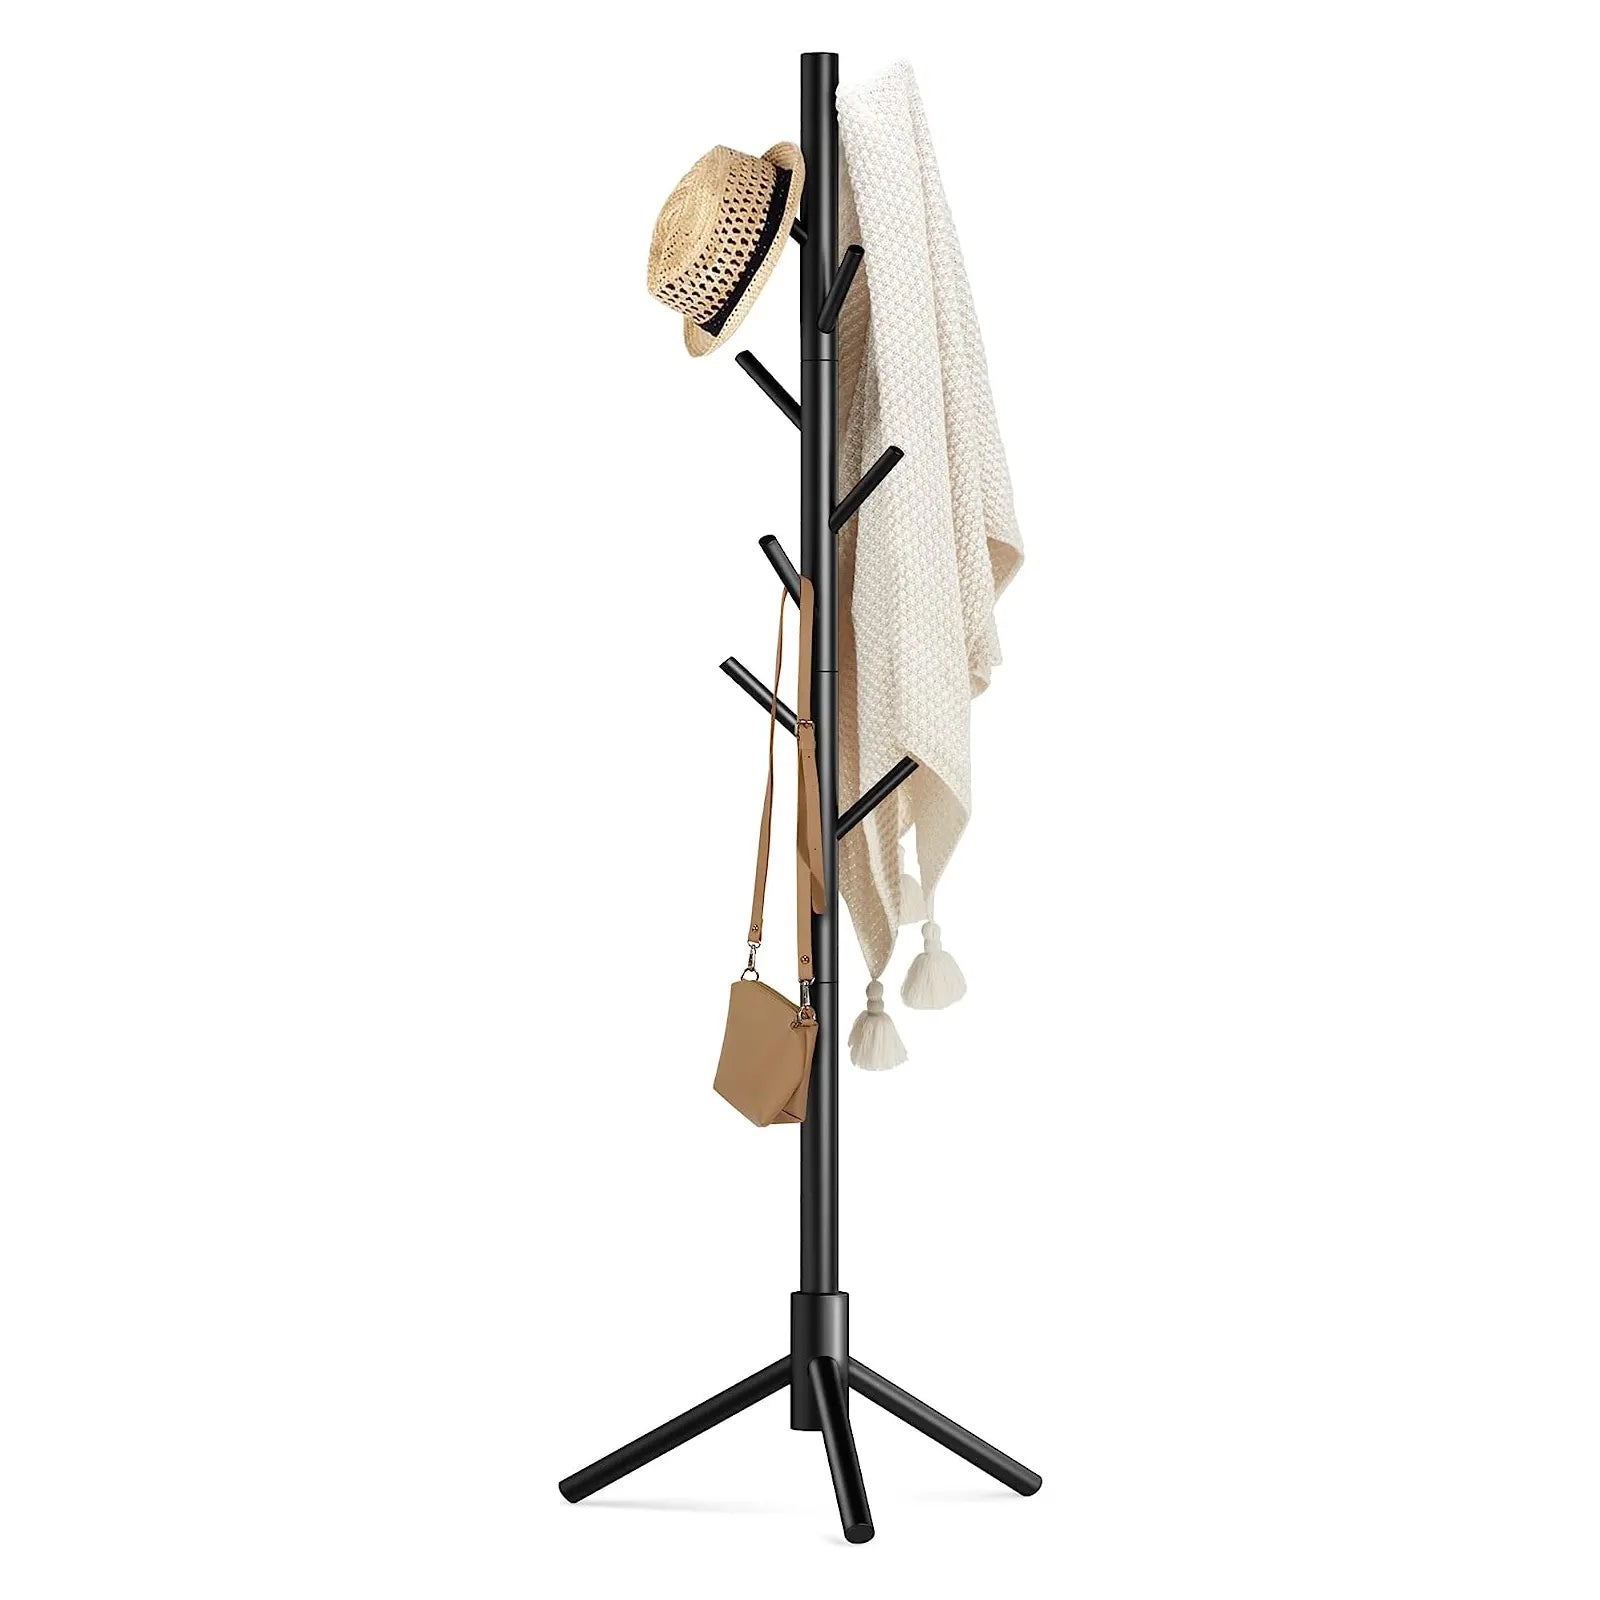 Wooden Coat Rack Stand with 8 Hooks Pine Adjustable Coat Standing Tree Easy Assembly for Coats, Hats, Scarves and Handbags for Entryway, Hallway, Bedroom, Office